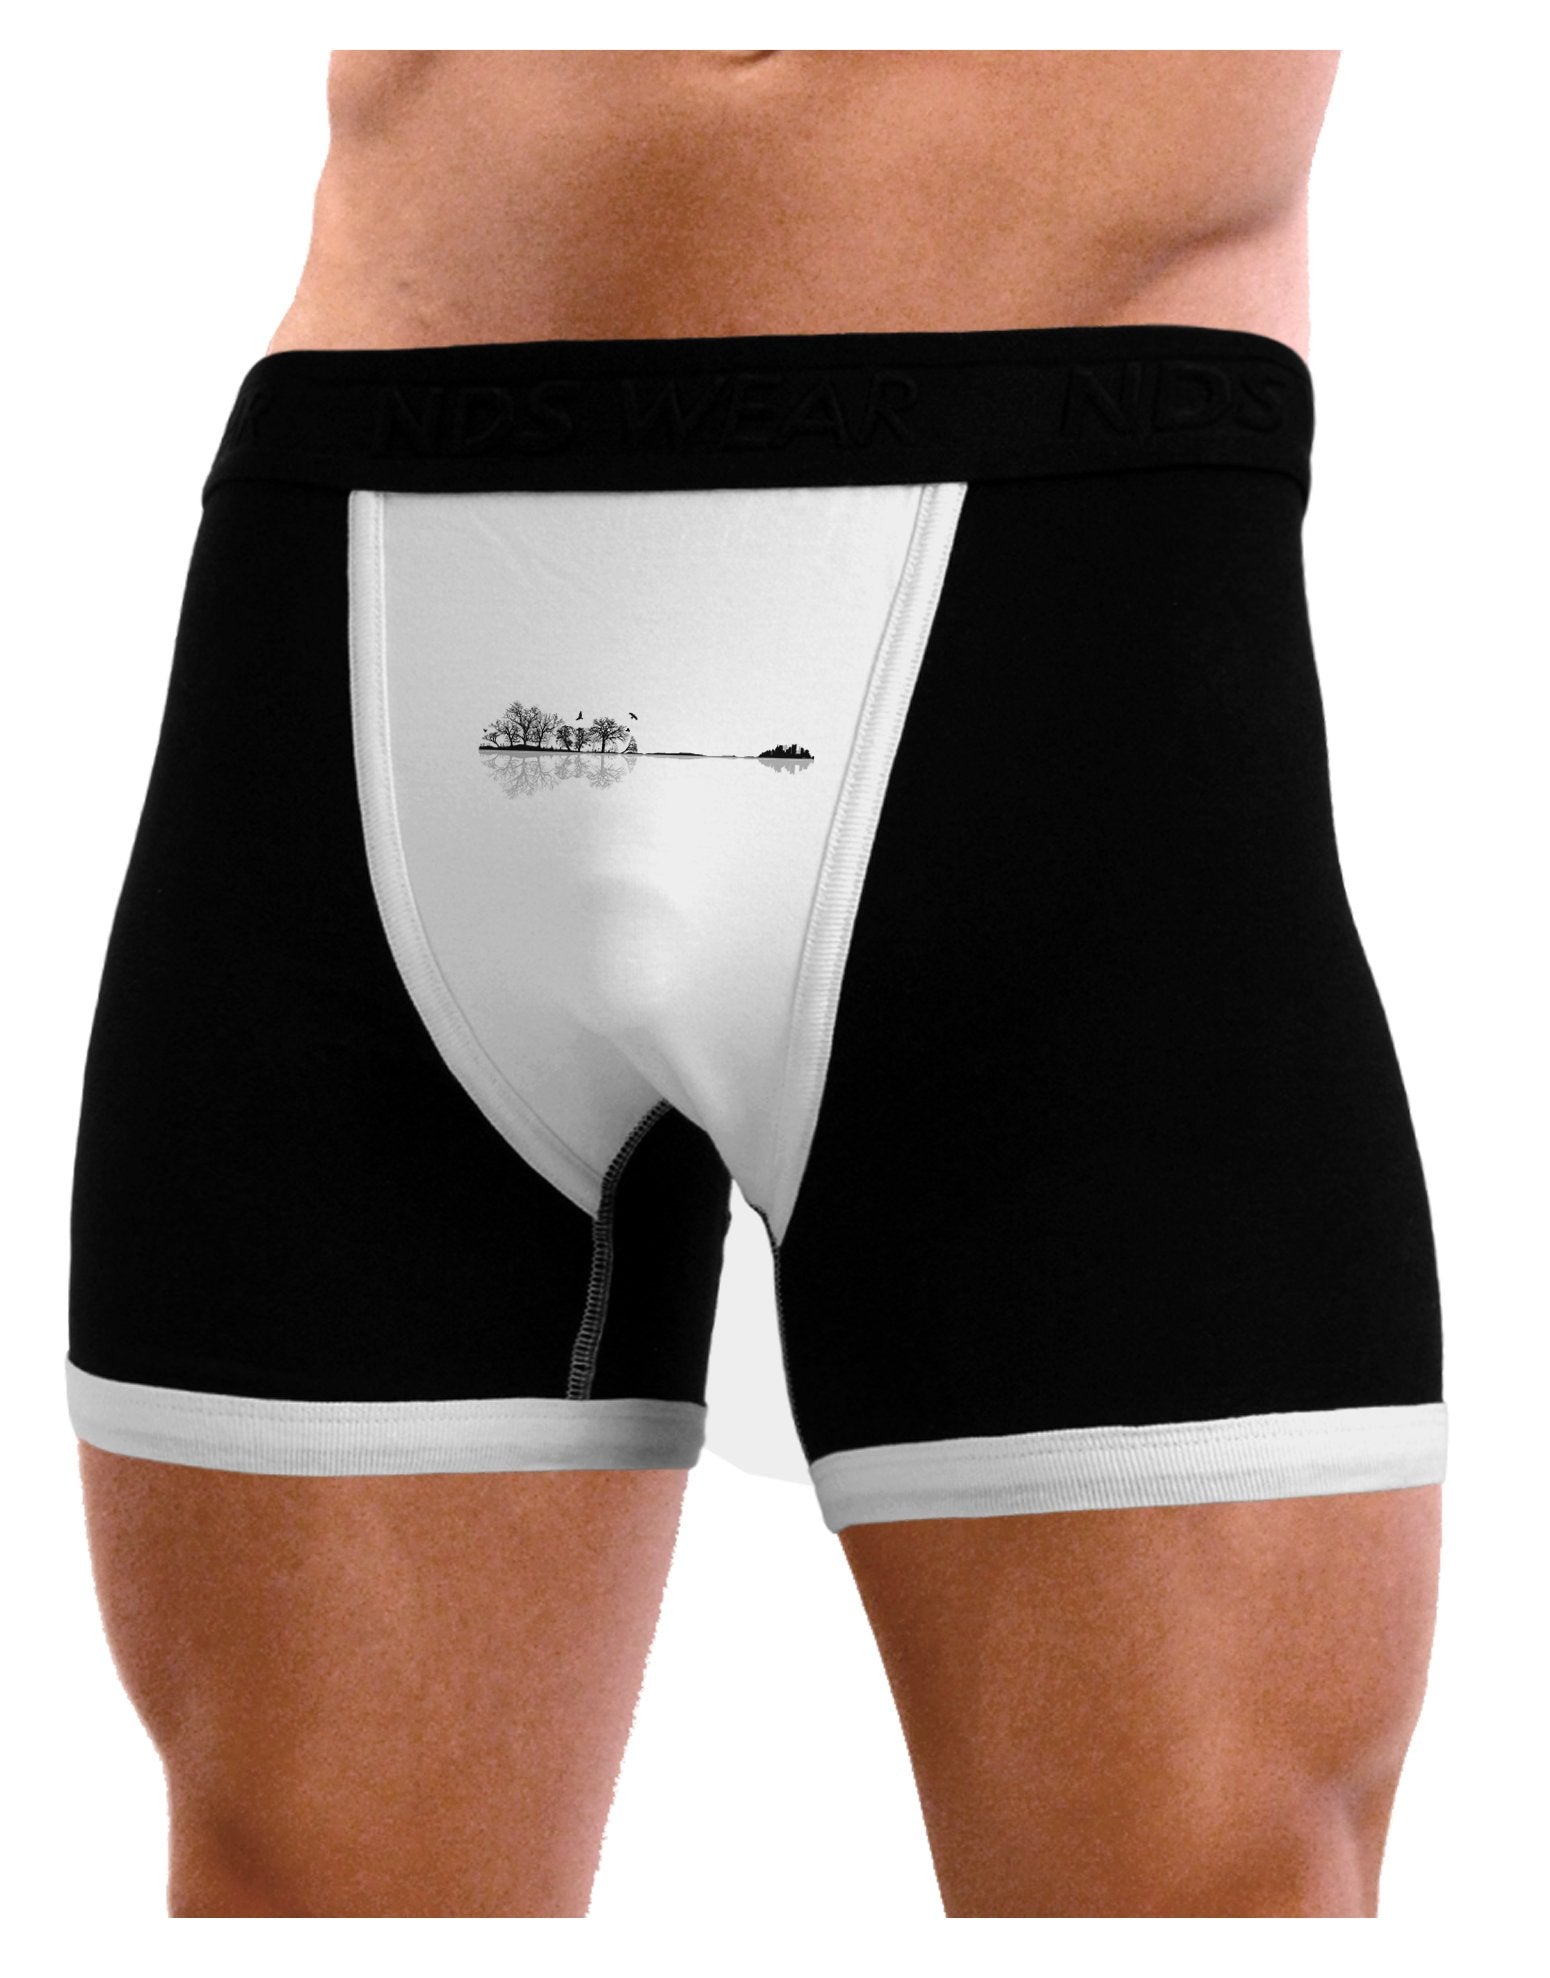 Nature‘s Harmony Guitar Mens Boxer Brief Underwear by TooLoud